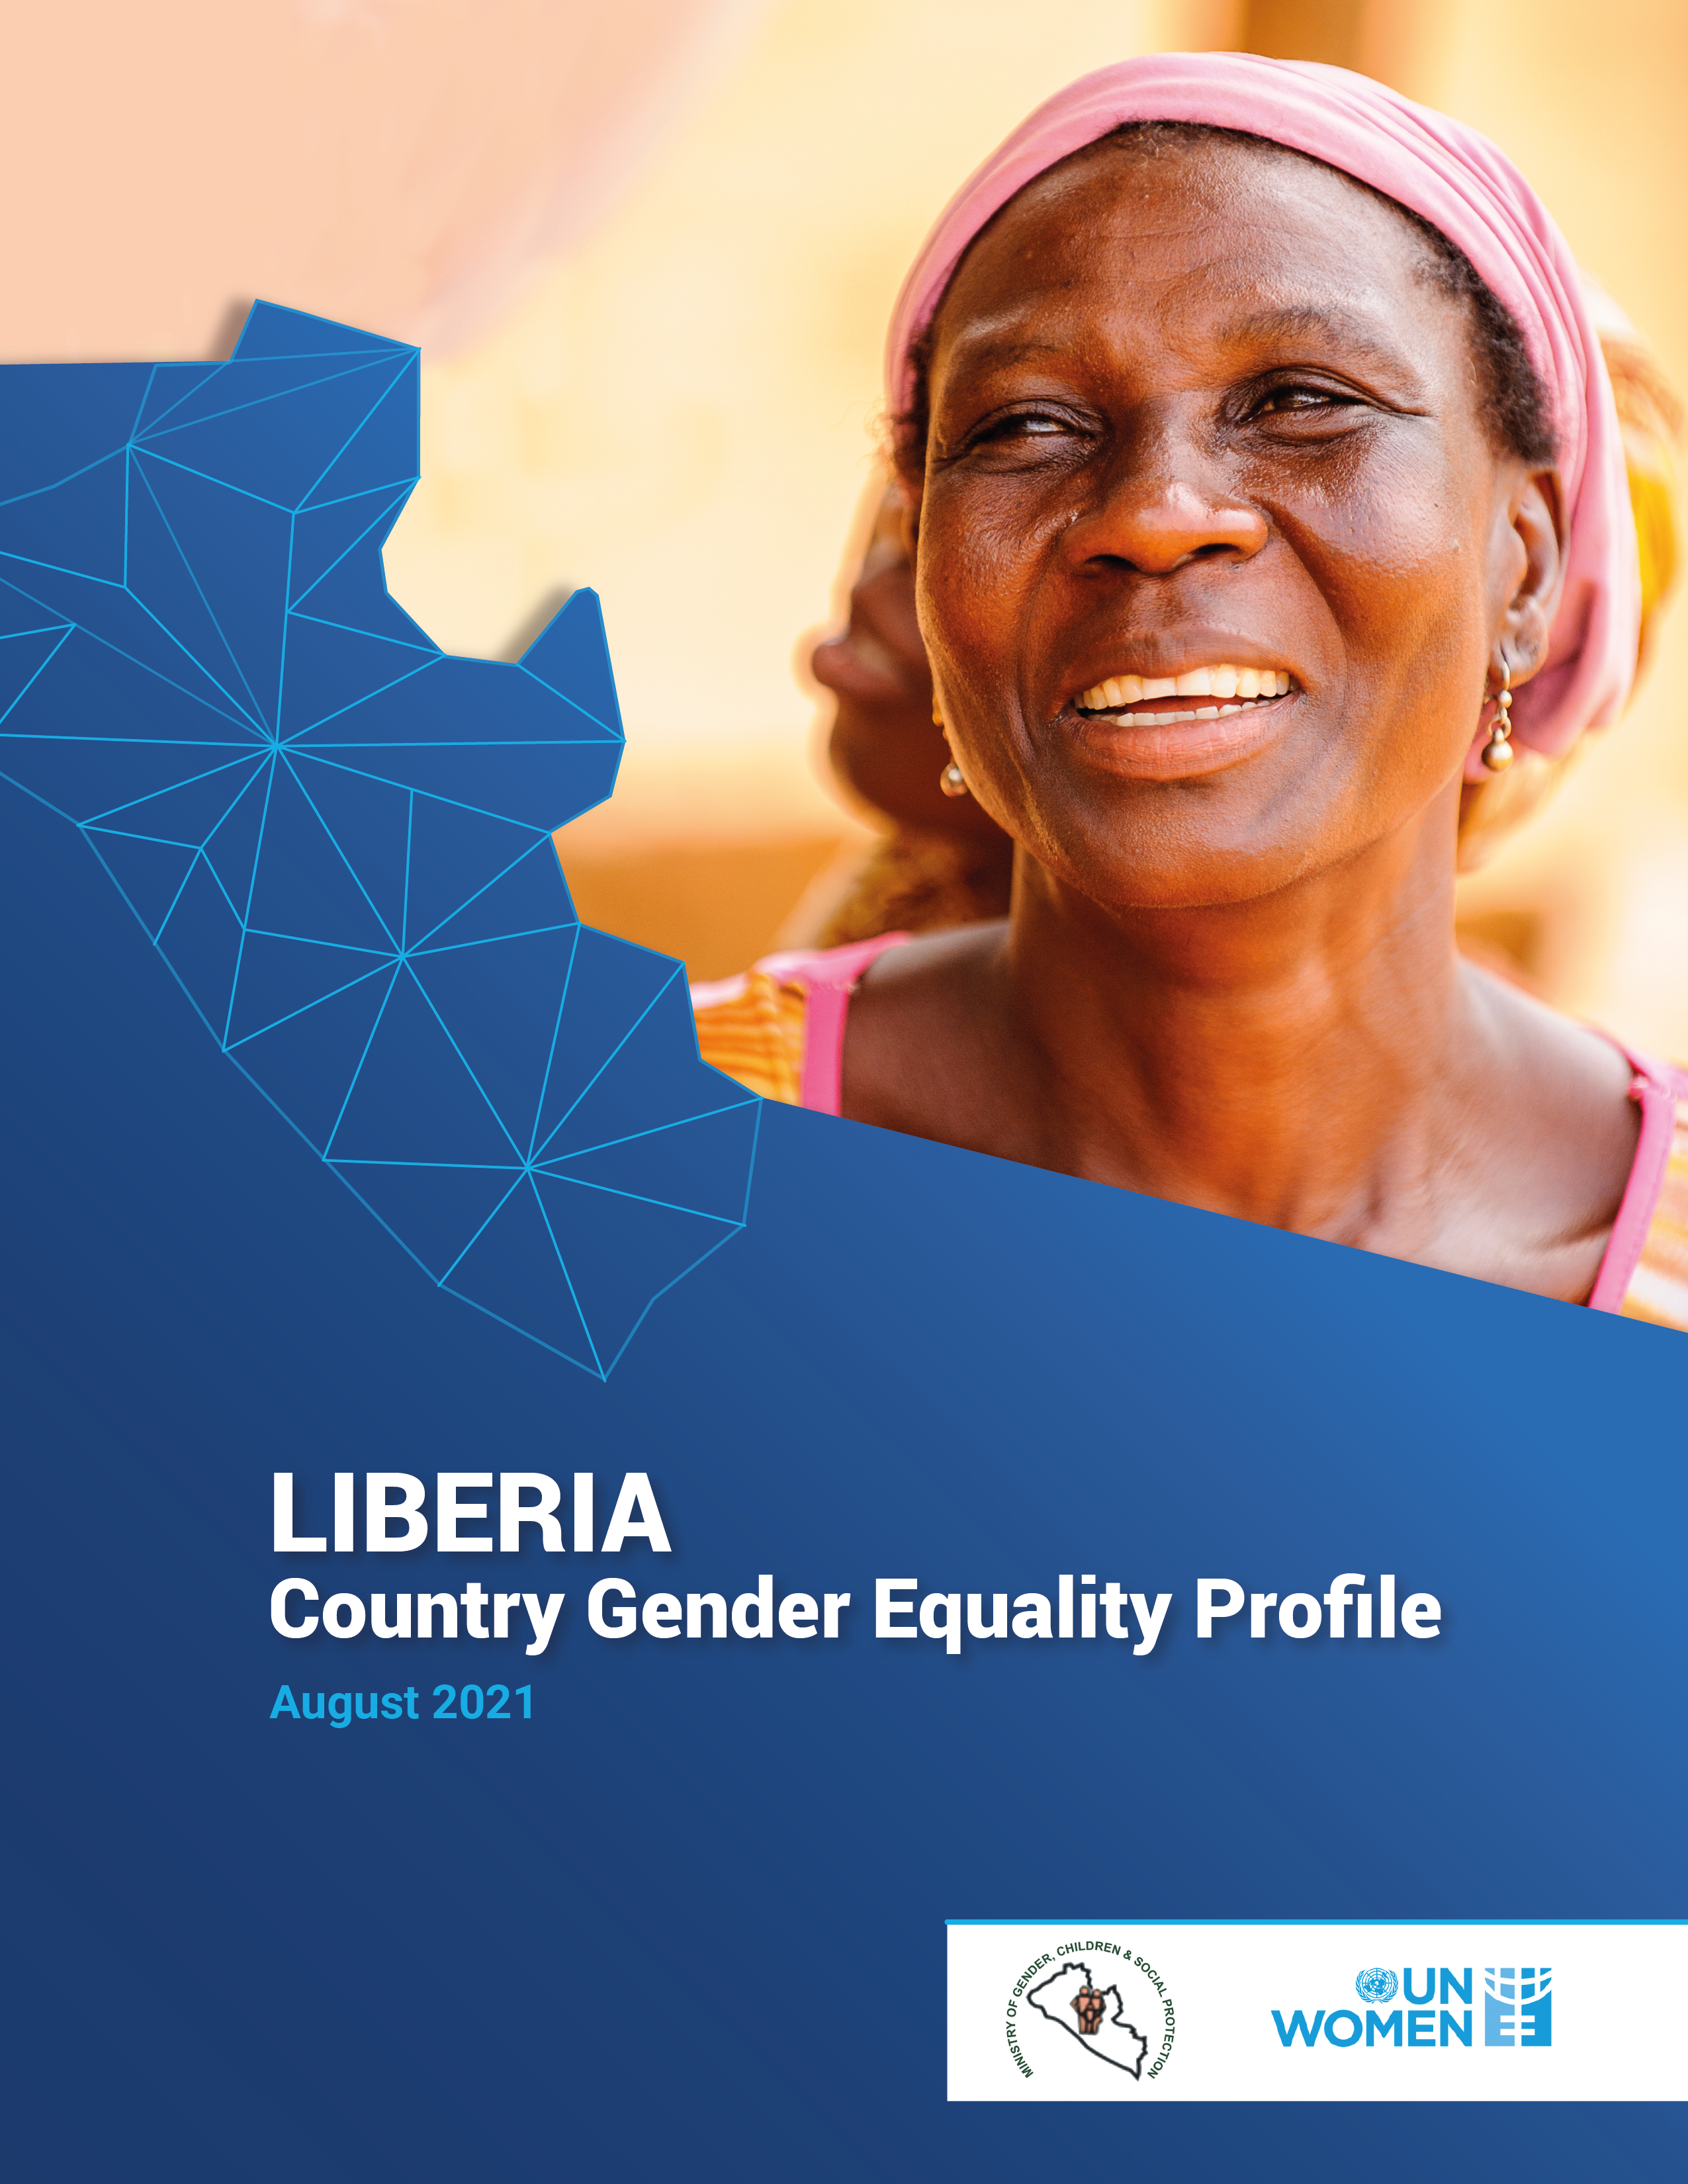 Country Gender Equality Profile for Liberia